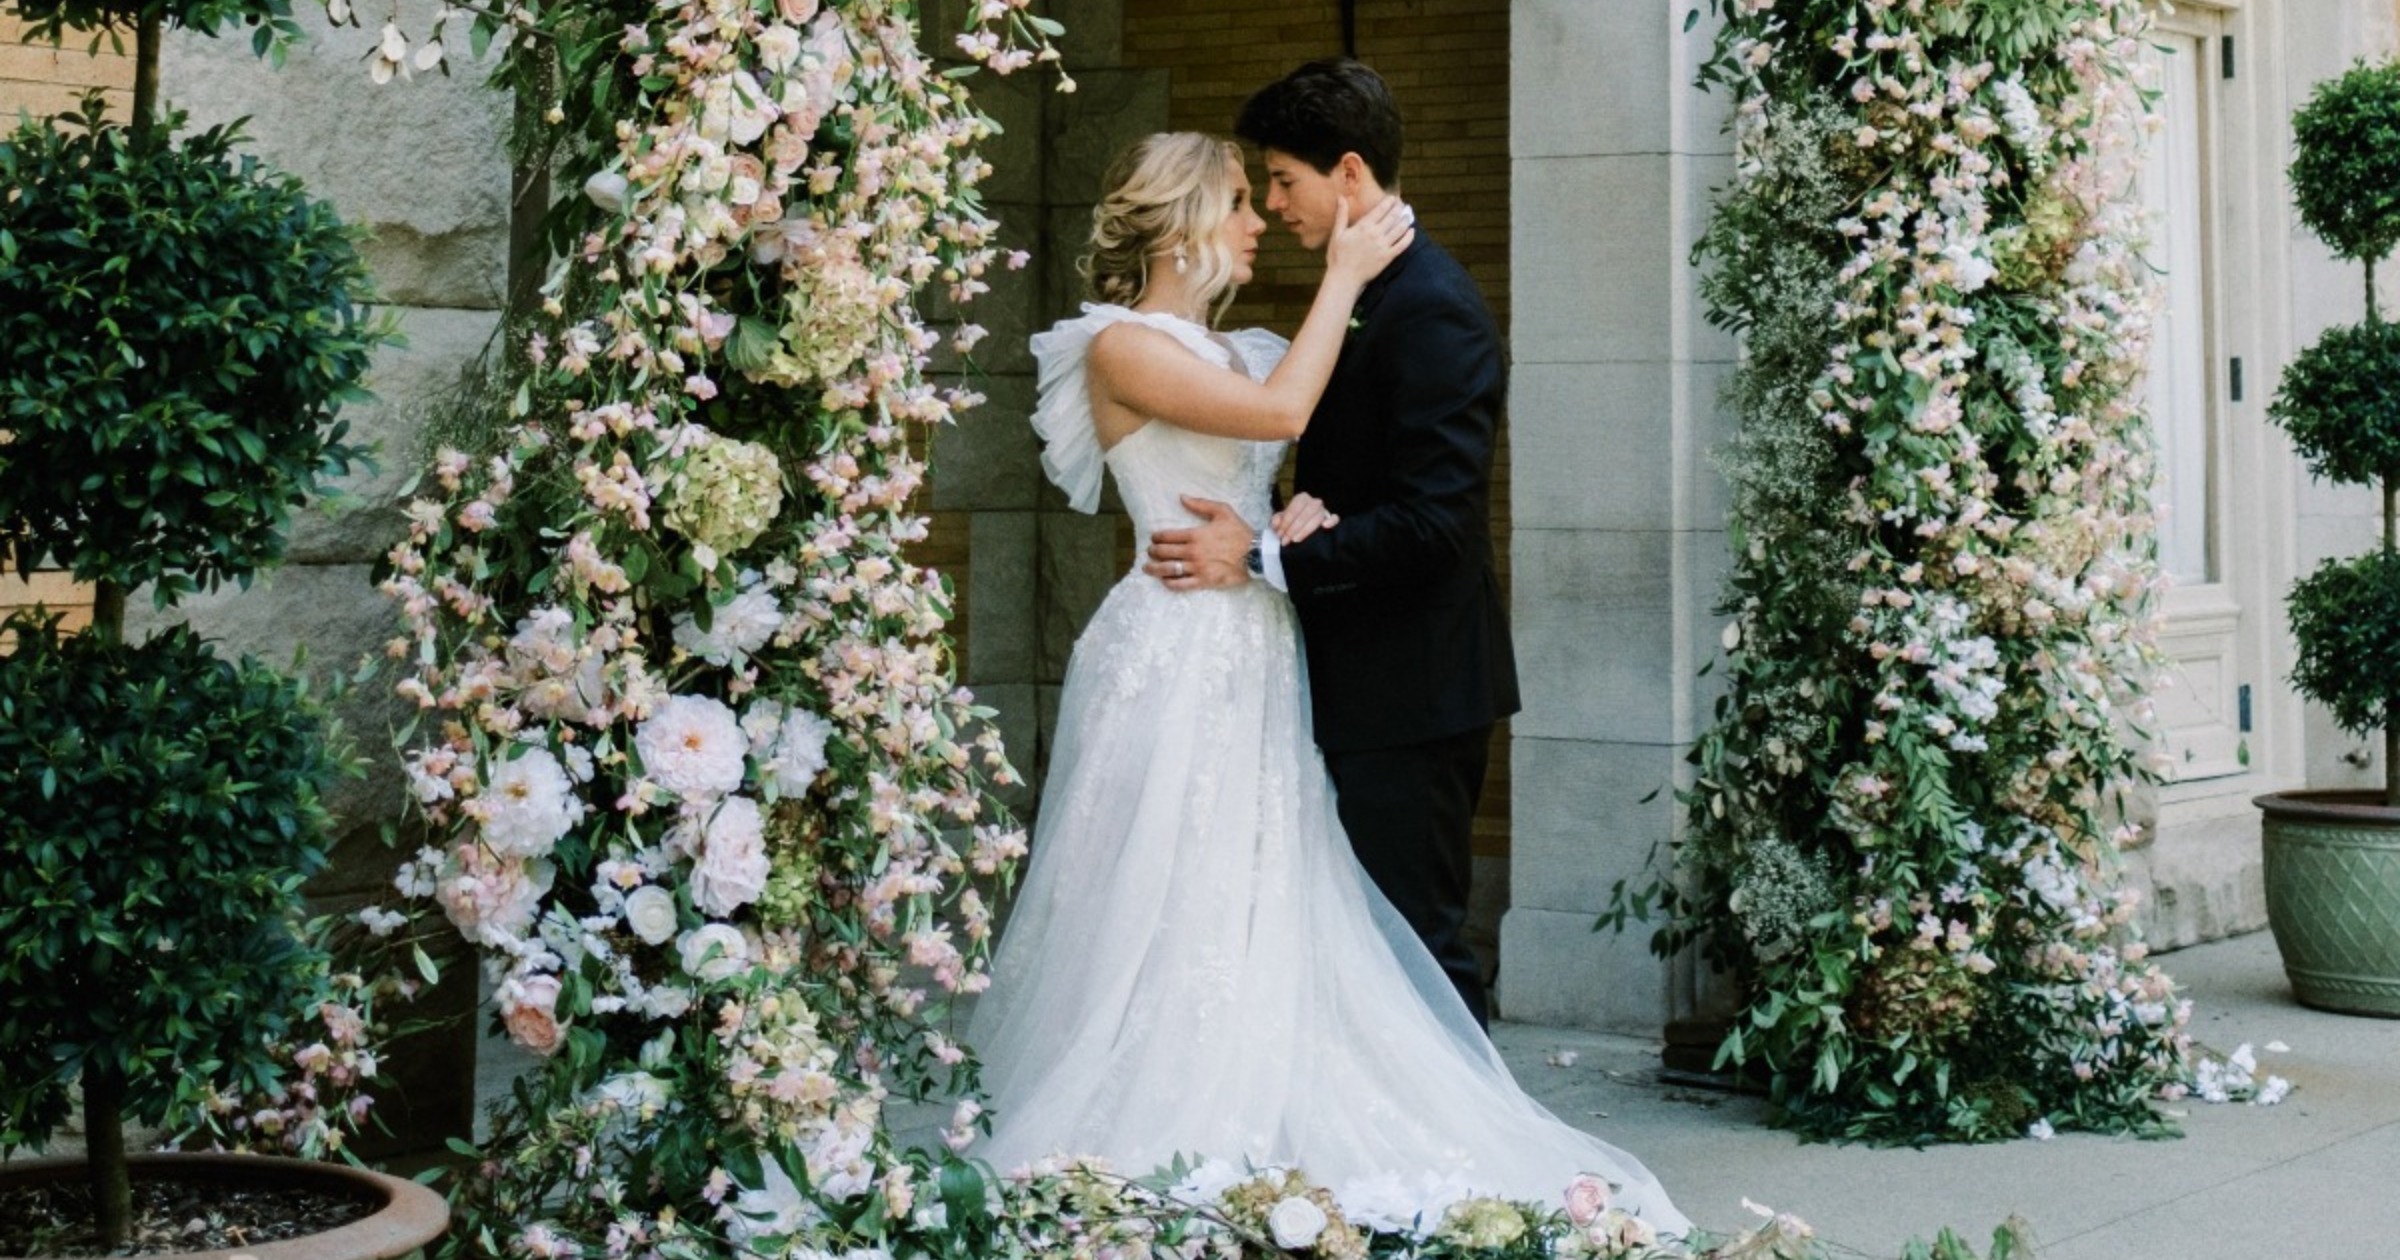 A French-Inspired Shoot with a Breathtaking Floral Archway